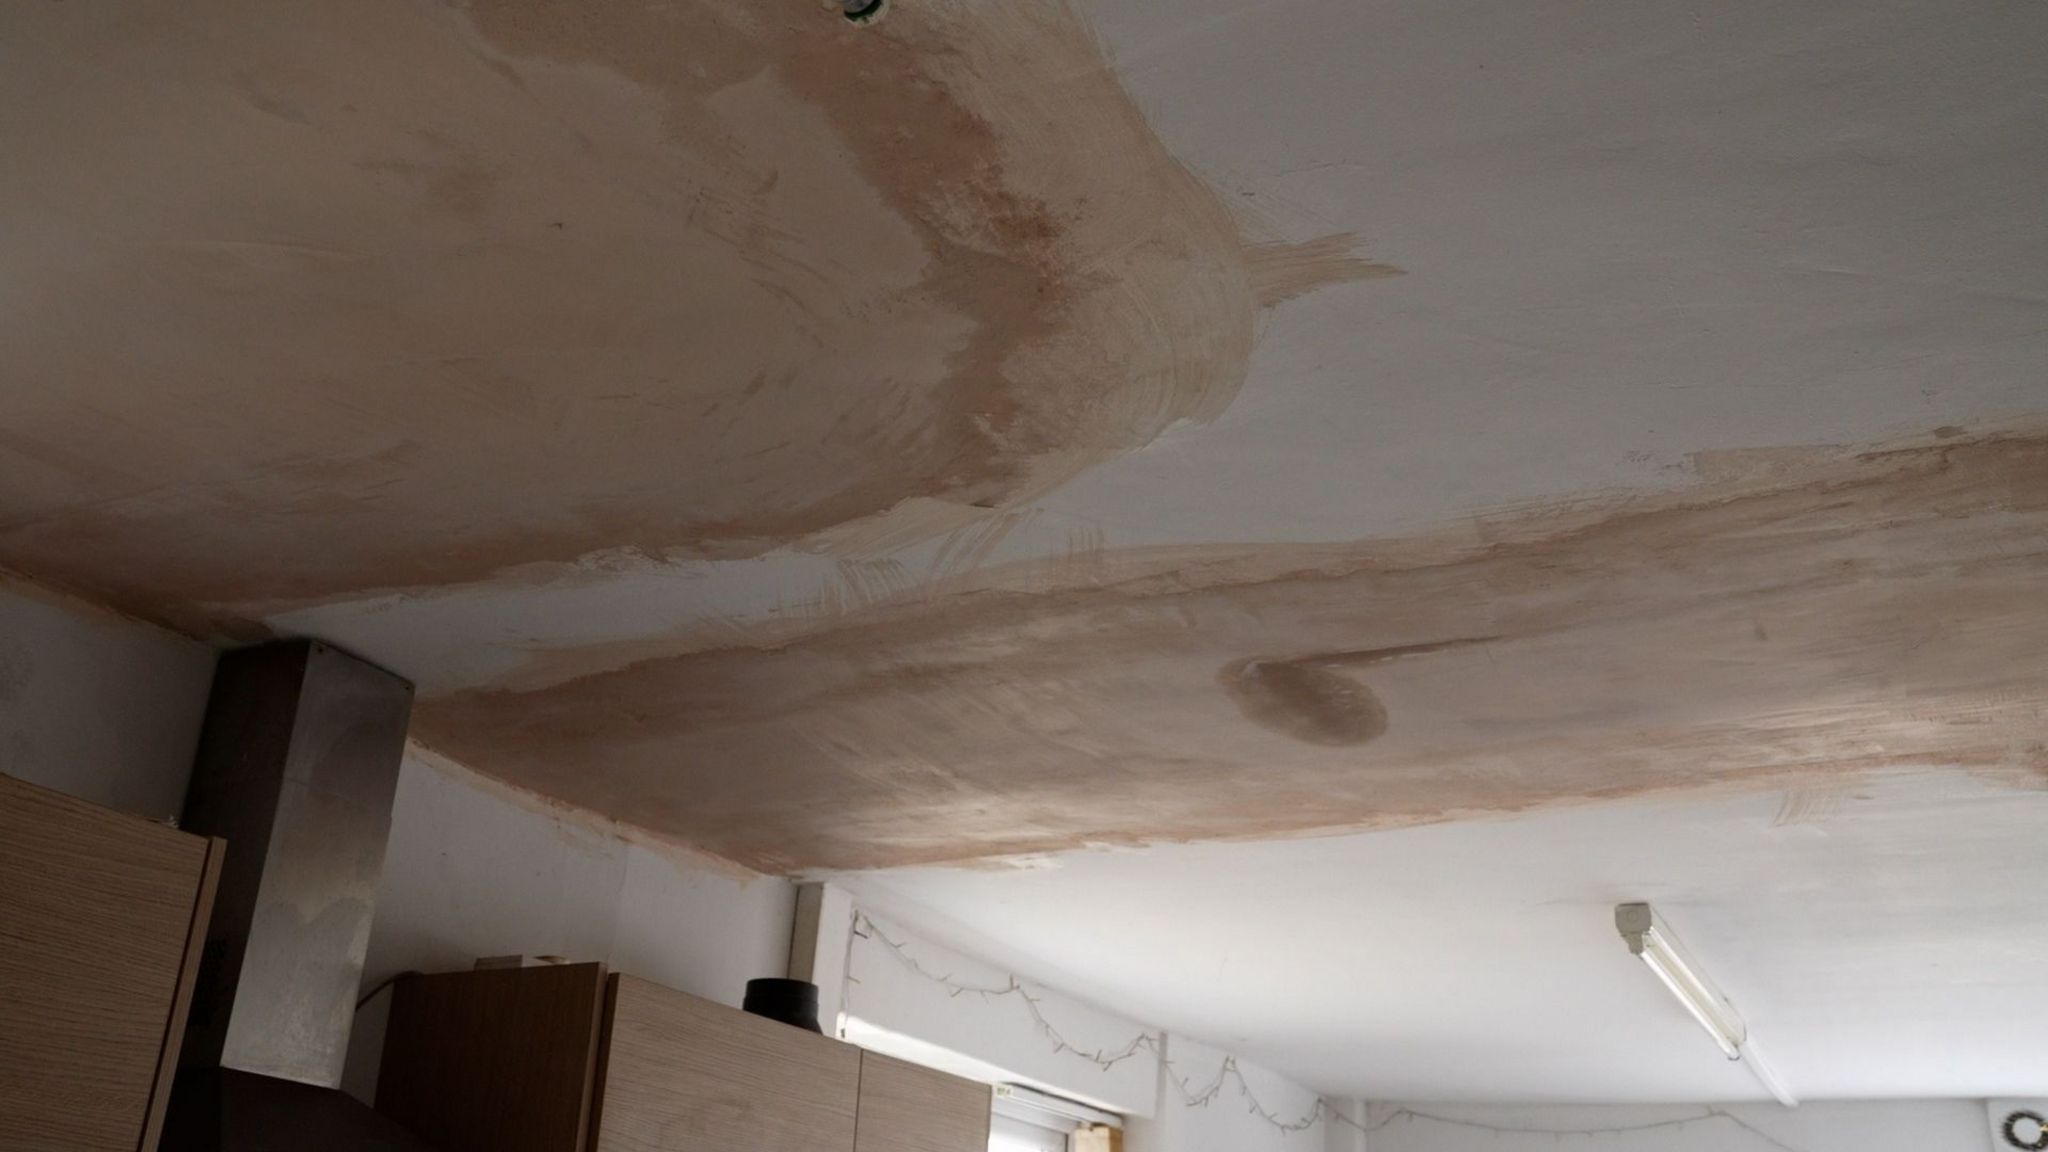 plastering in Elin's house appearing an entirely different colour and texture to the ceiling around it